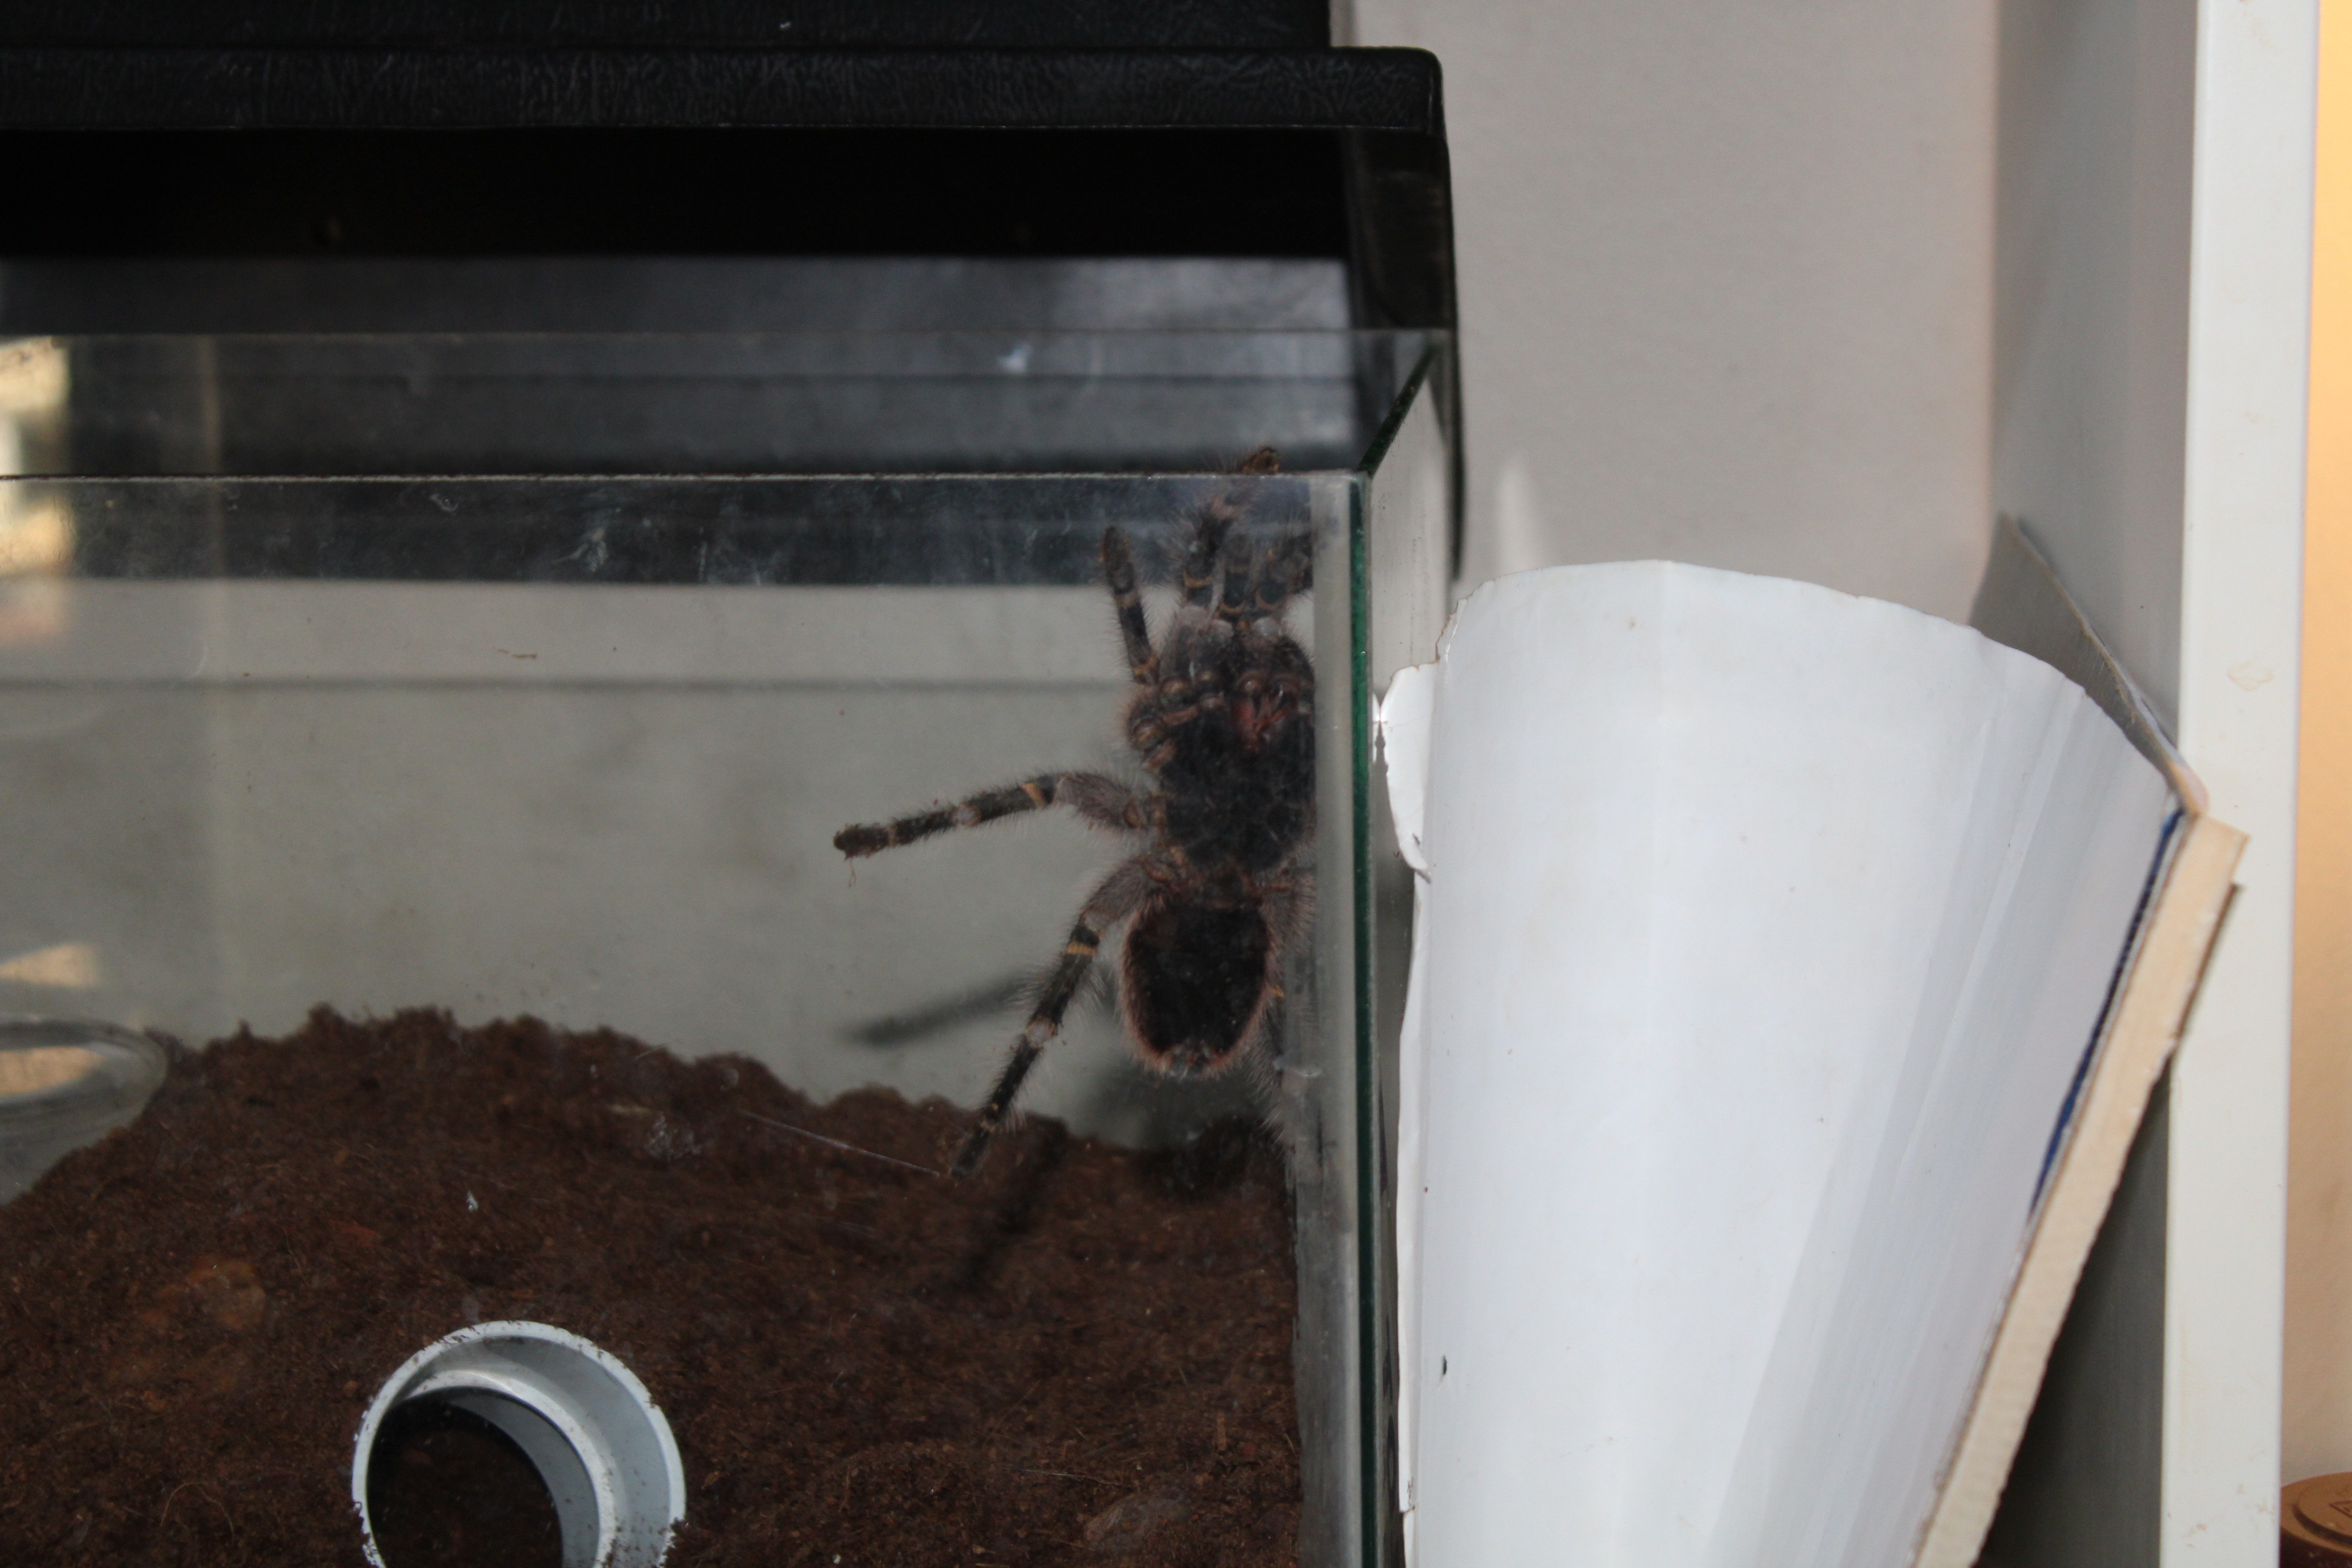 G.pulchrupes sees her chance!